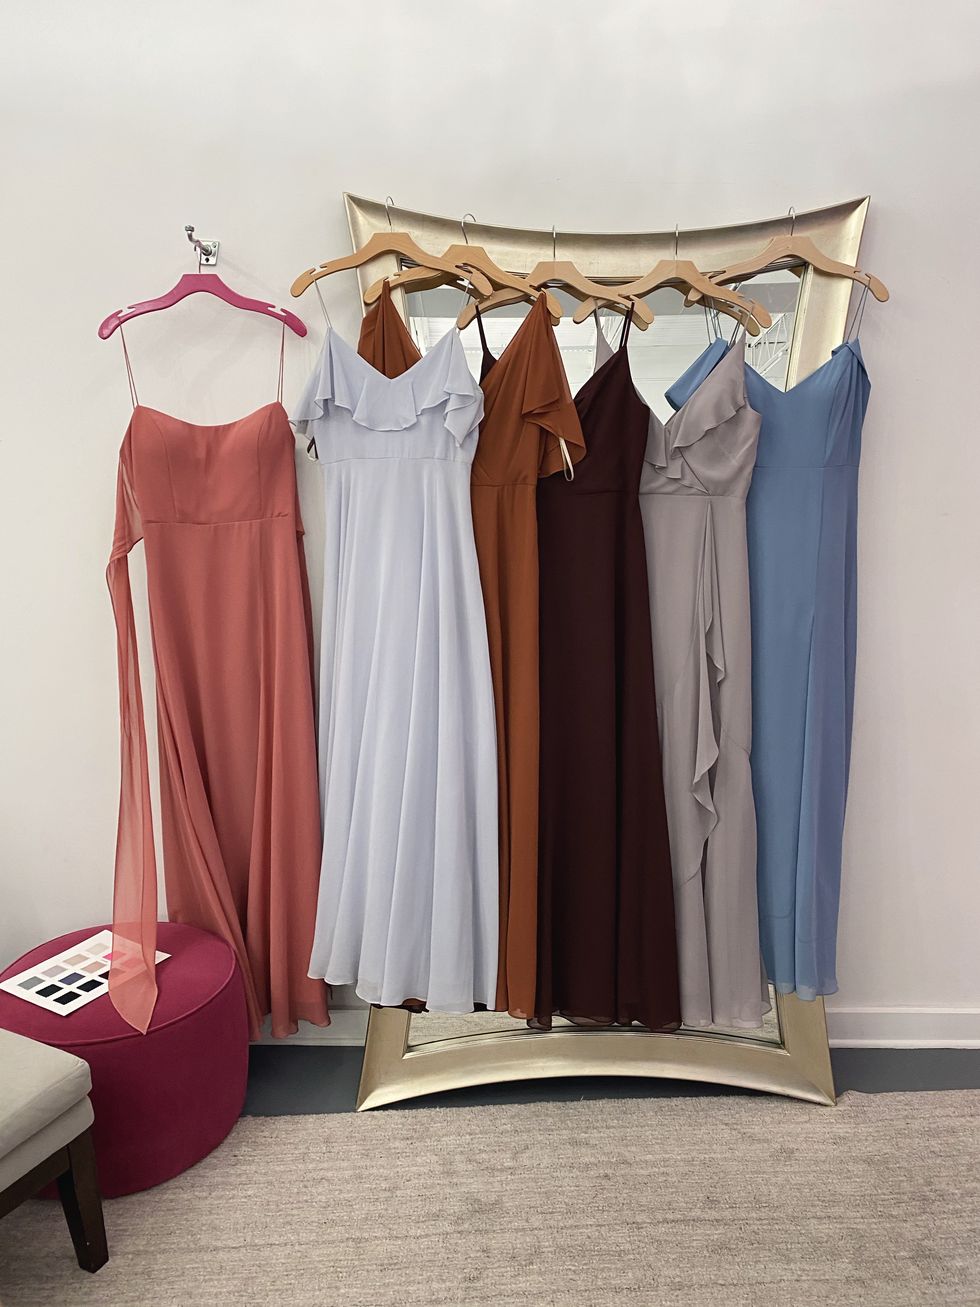 alex, paige, and ree drummond shop for bridesmaids dresses in dallas, texas